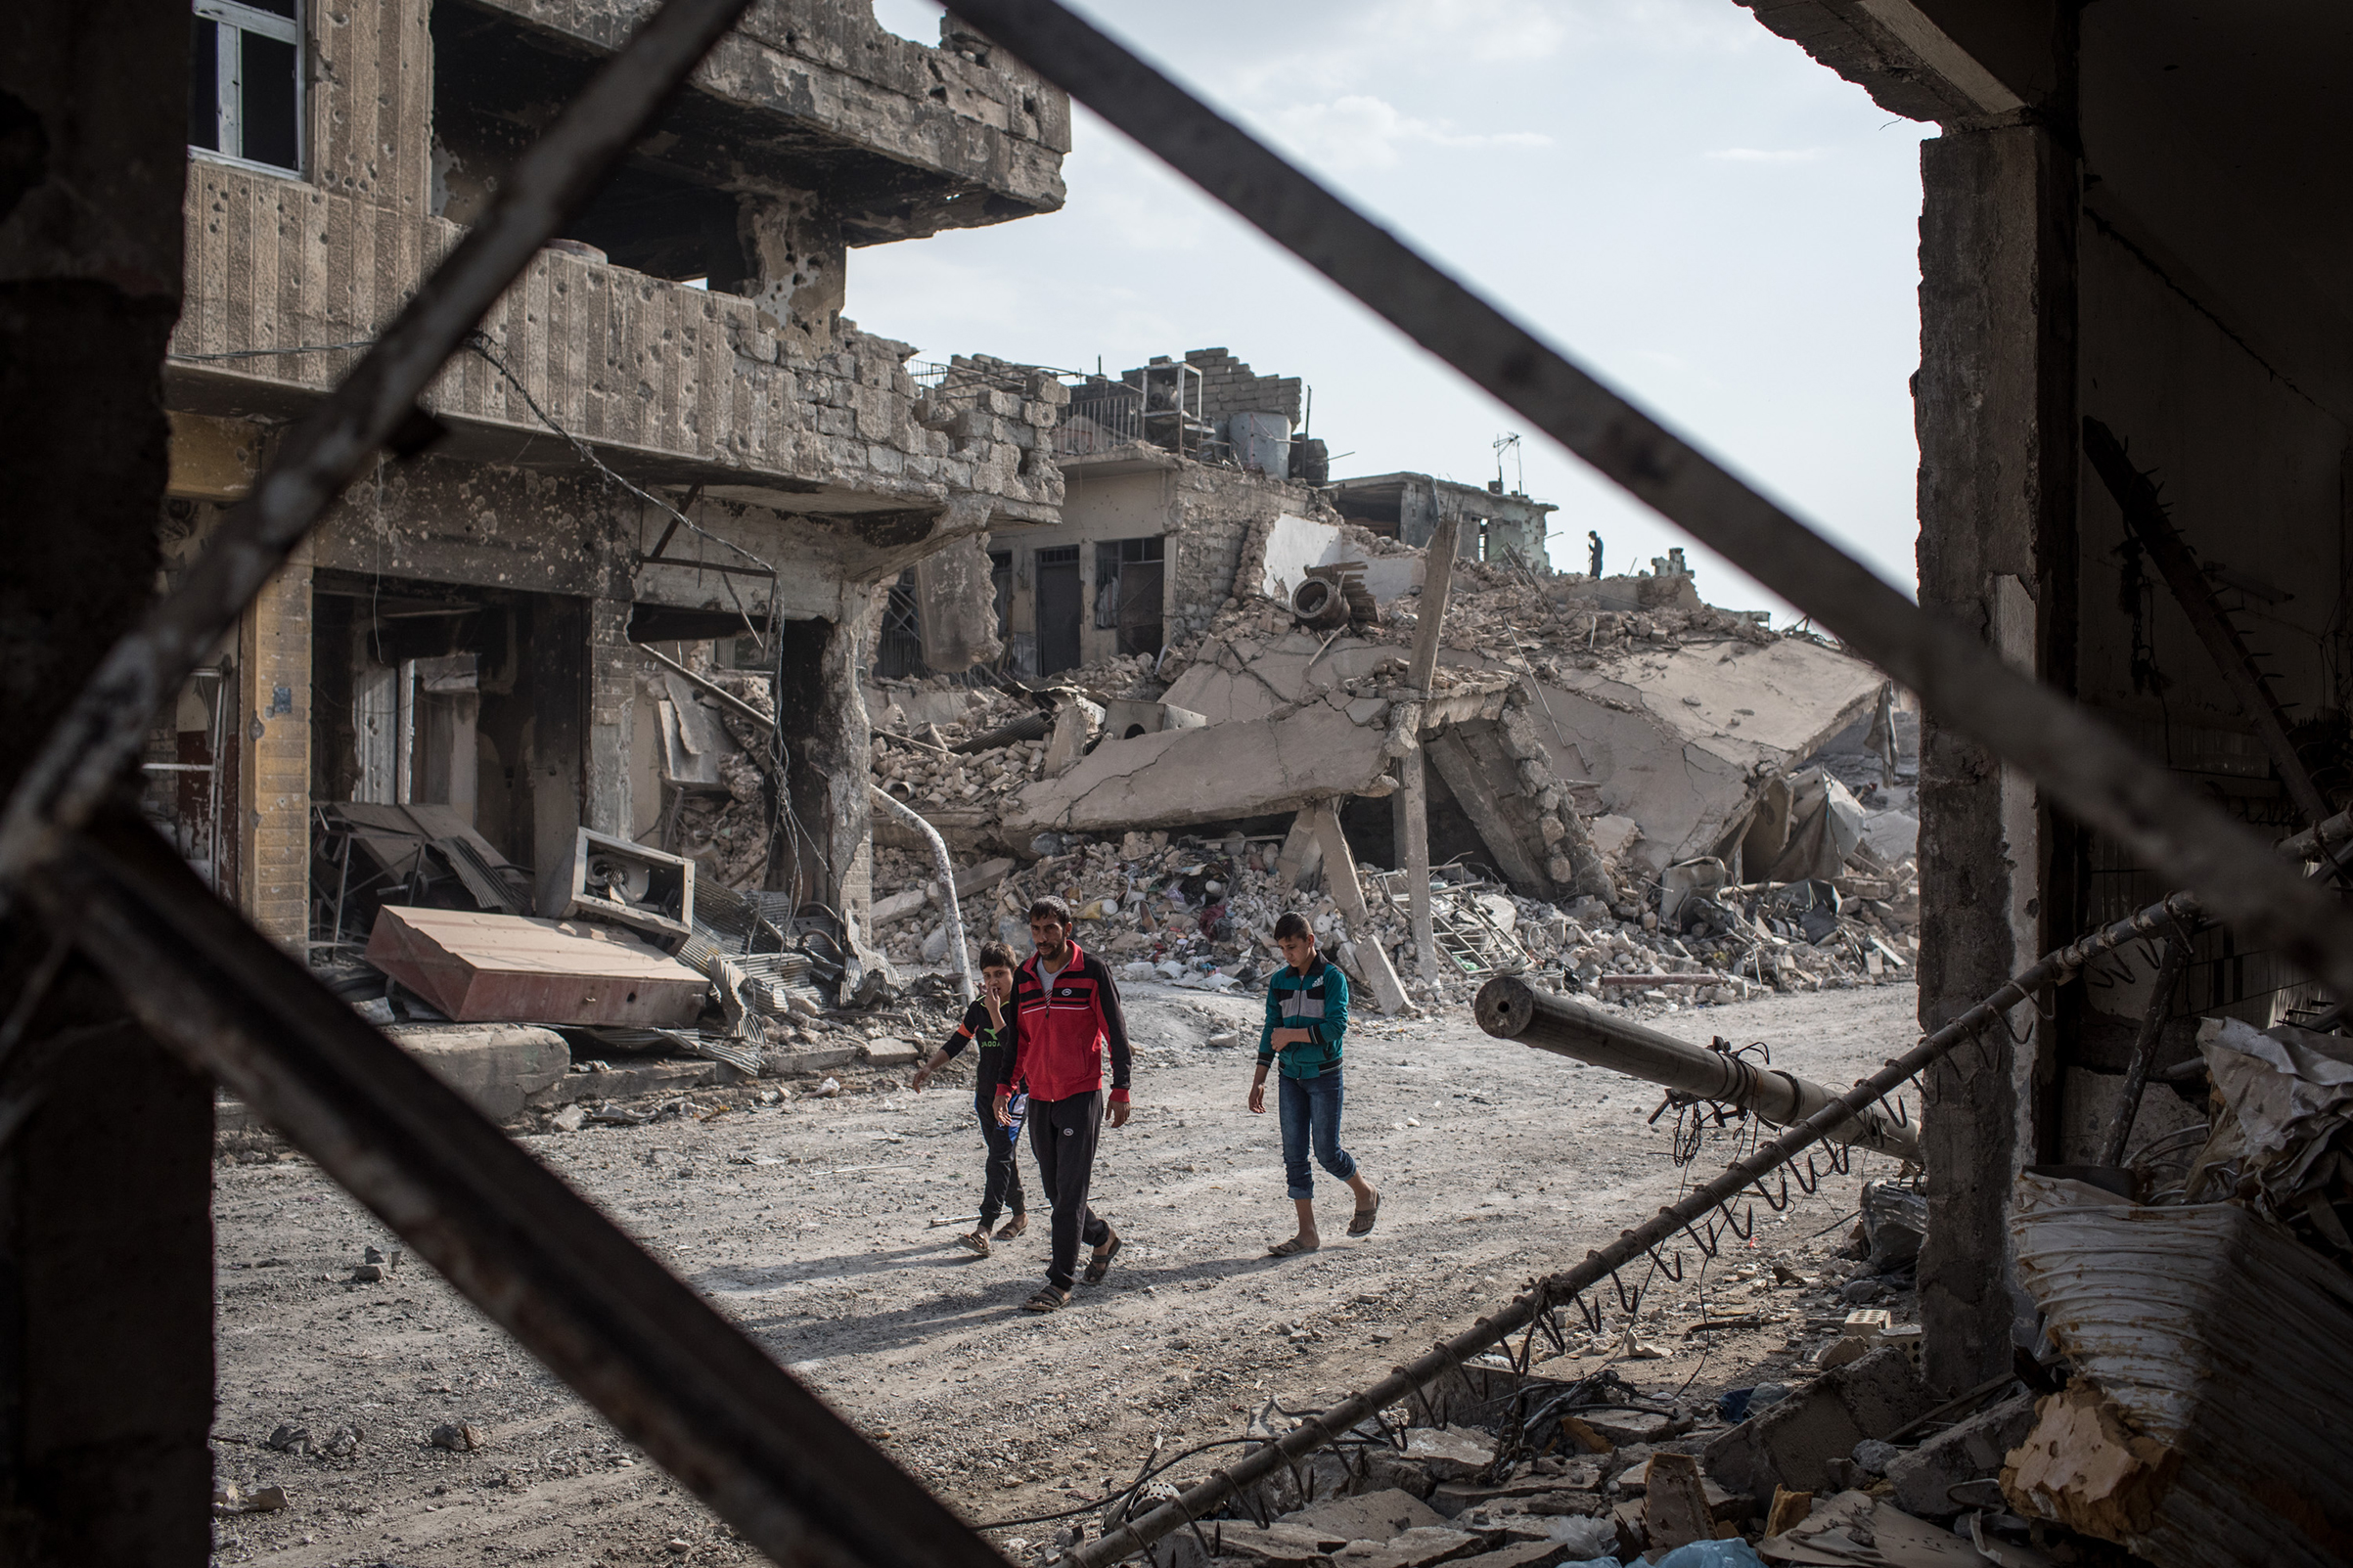 People walk amongst rubble from destroyed buildings in an outer neighborhood of the Old City in West Mosul on November 6, 2017 in Mosul, Iraq. (Chris McGrath—Getty Images)